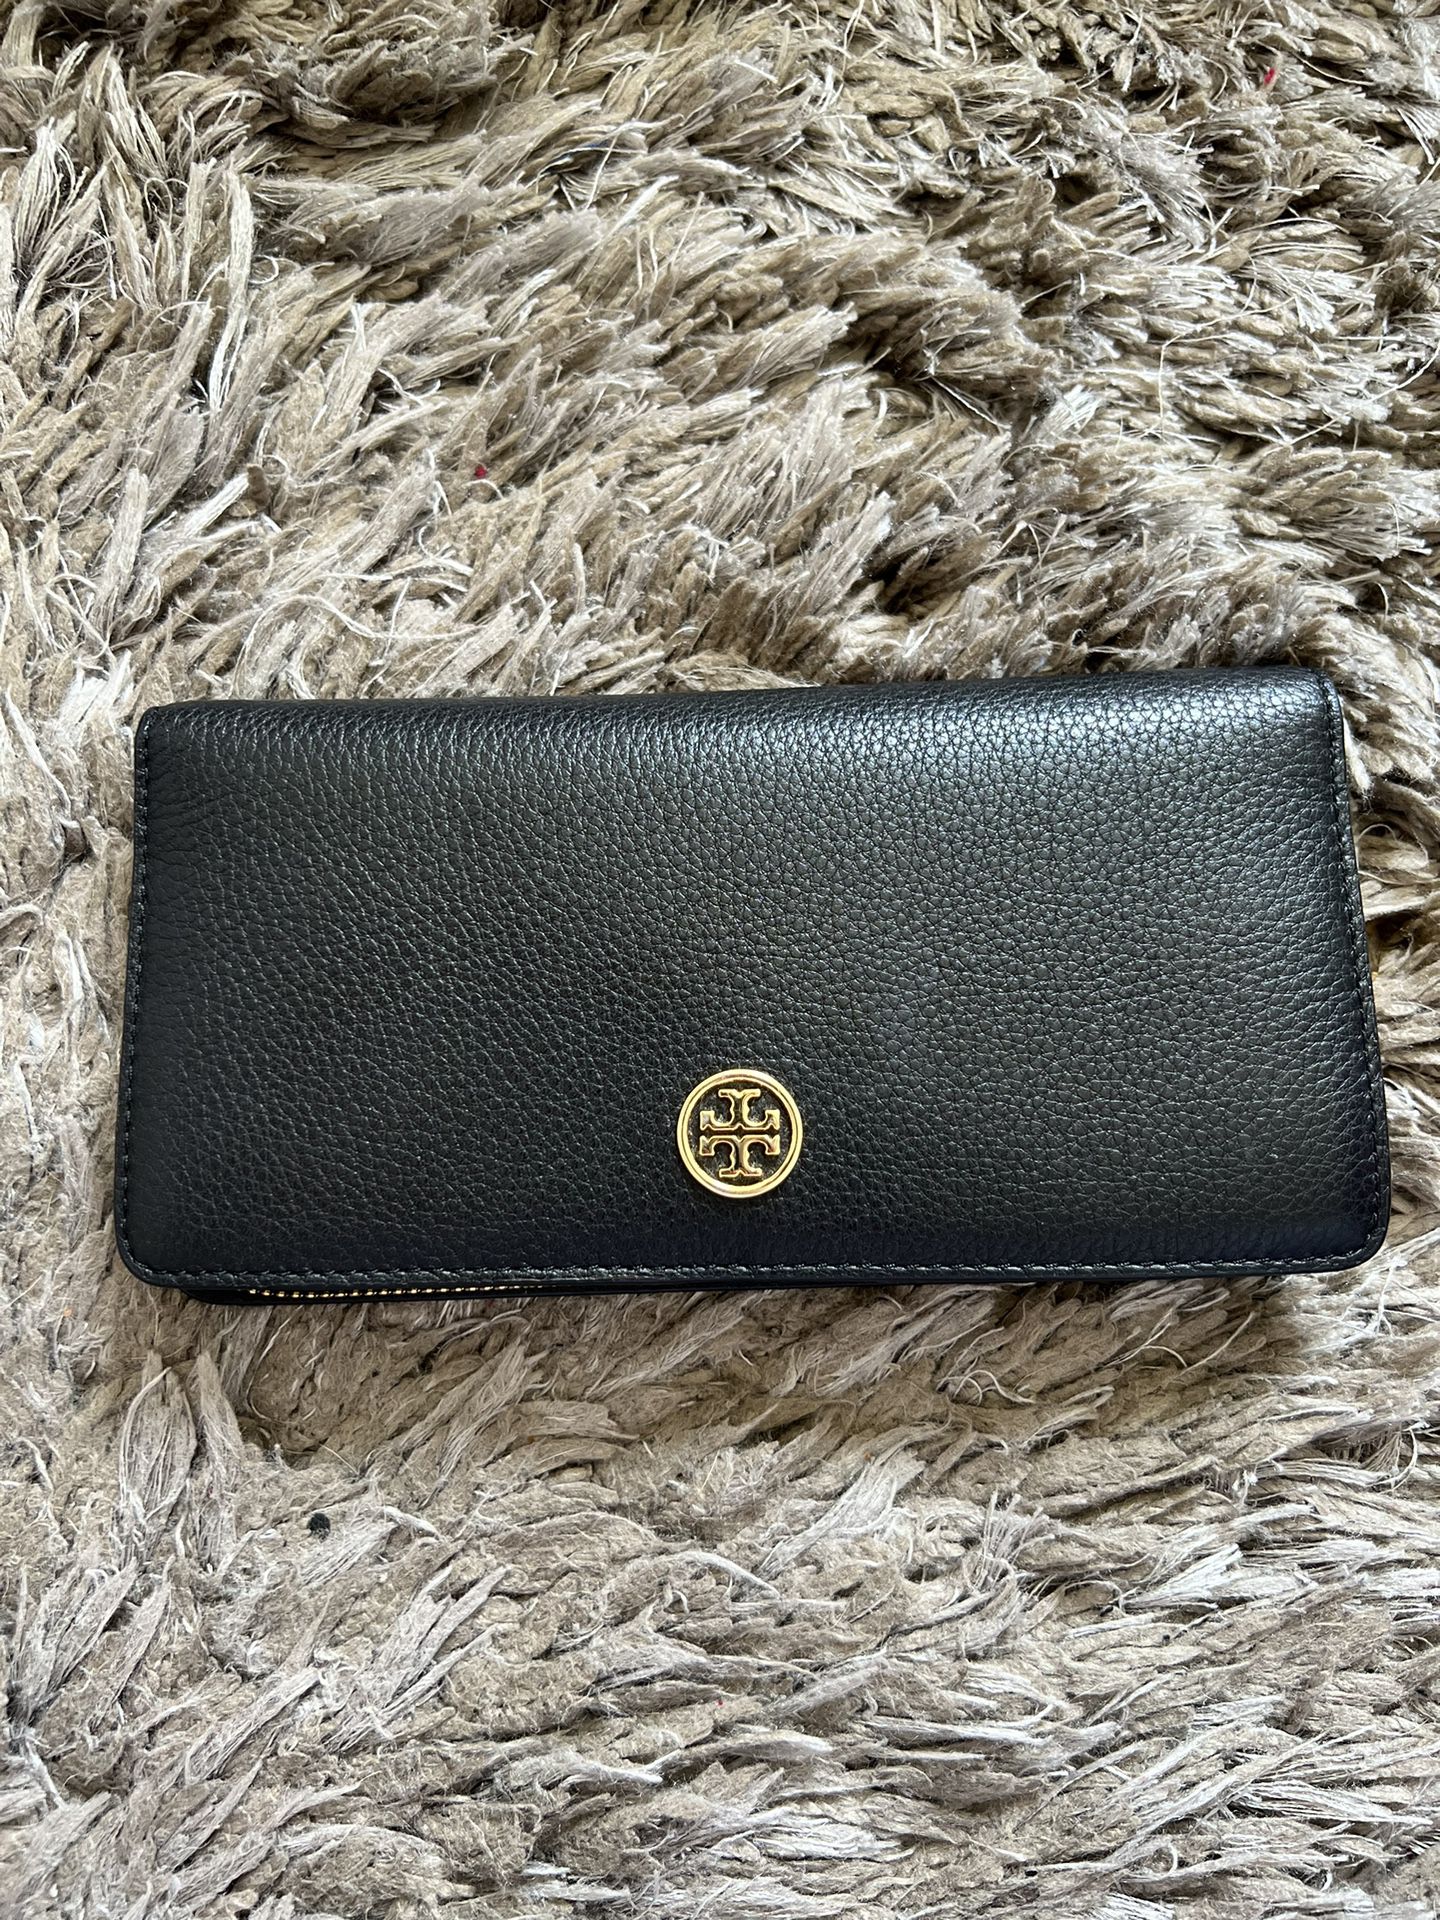 Authentic Tory Burch Soft Leather Long Wallet for Sale in Westminster, CA -  OfferUp